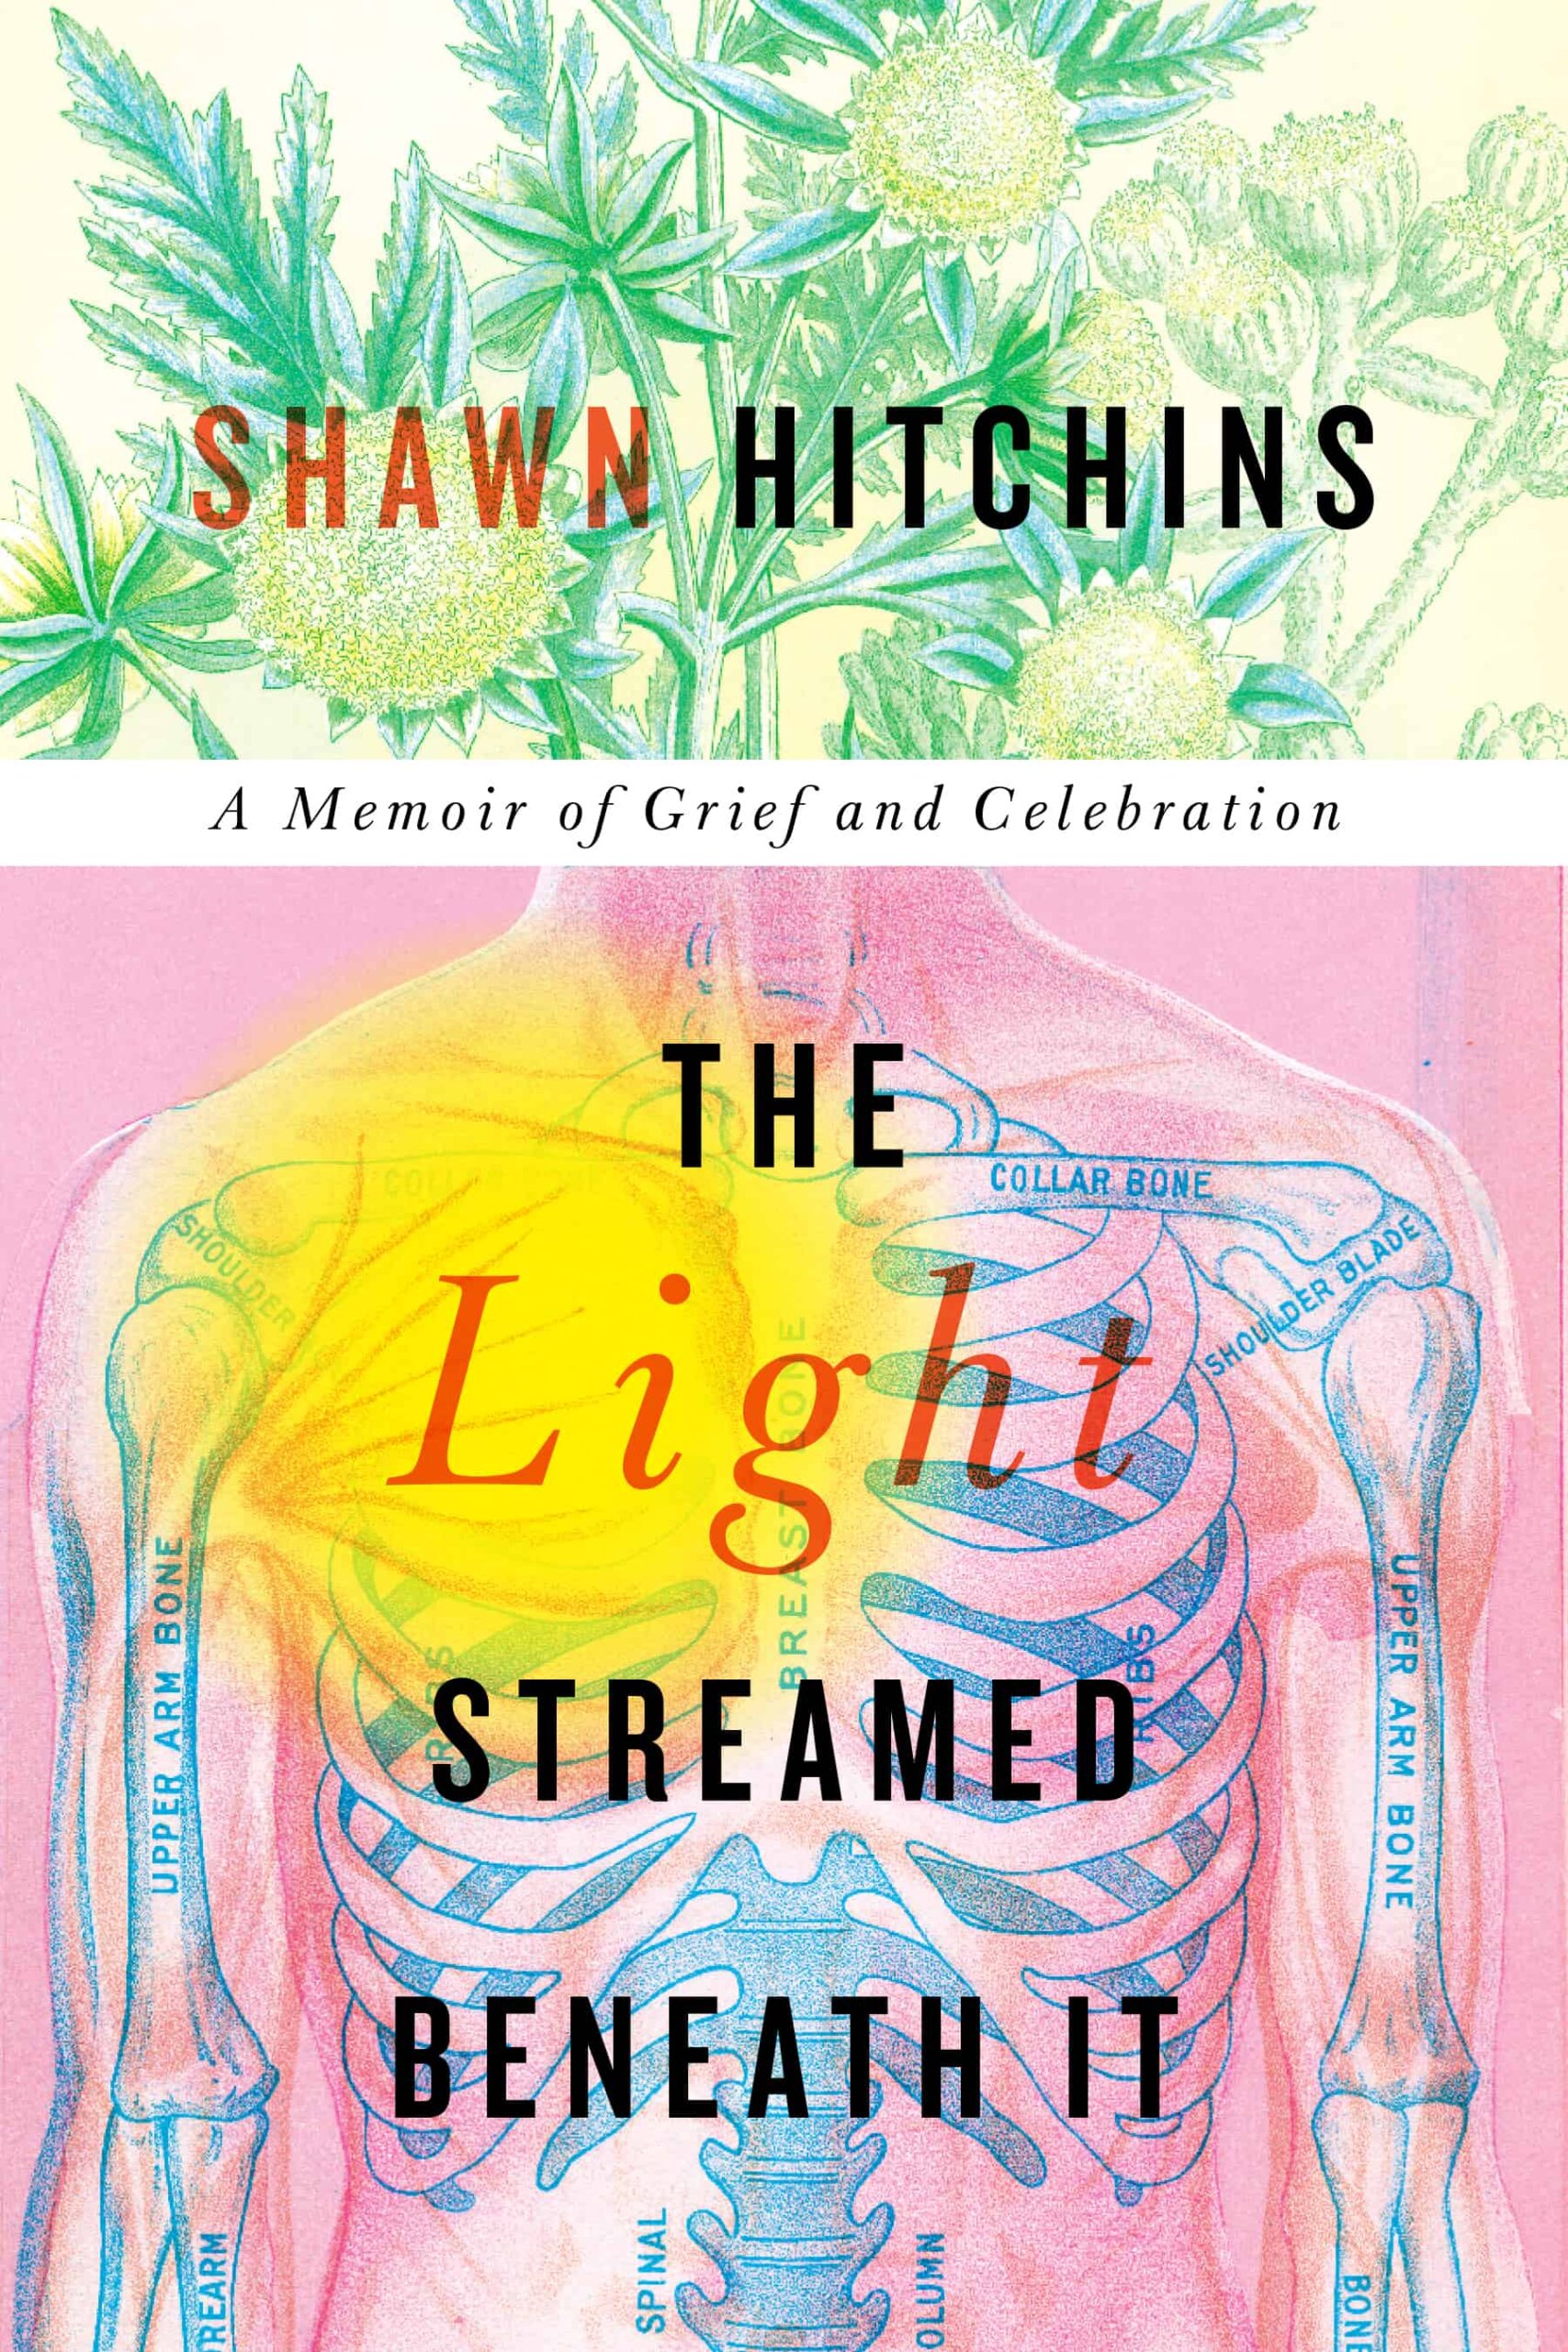 The book jacket for The Light Streamed beneath It, subtitled, a memoir of grief and celebration, features illustrations of thistles and a see-through body.